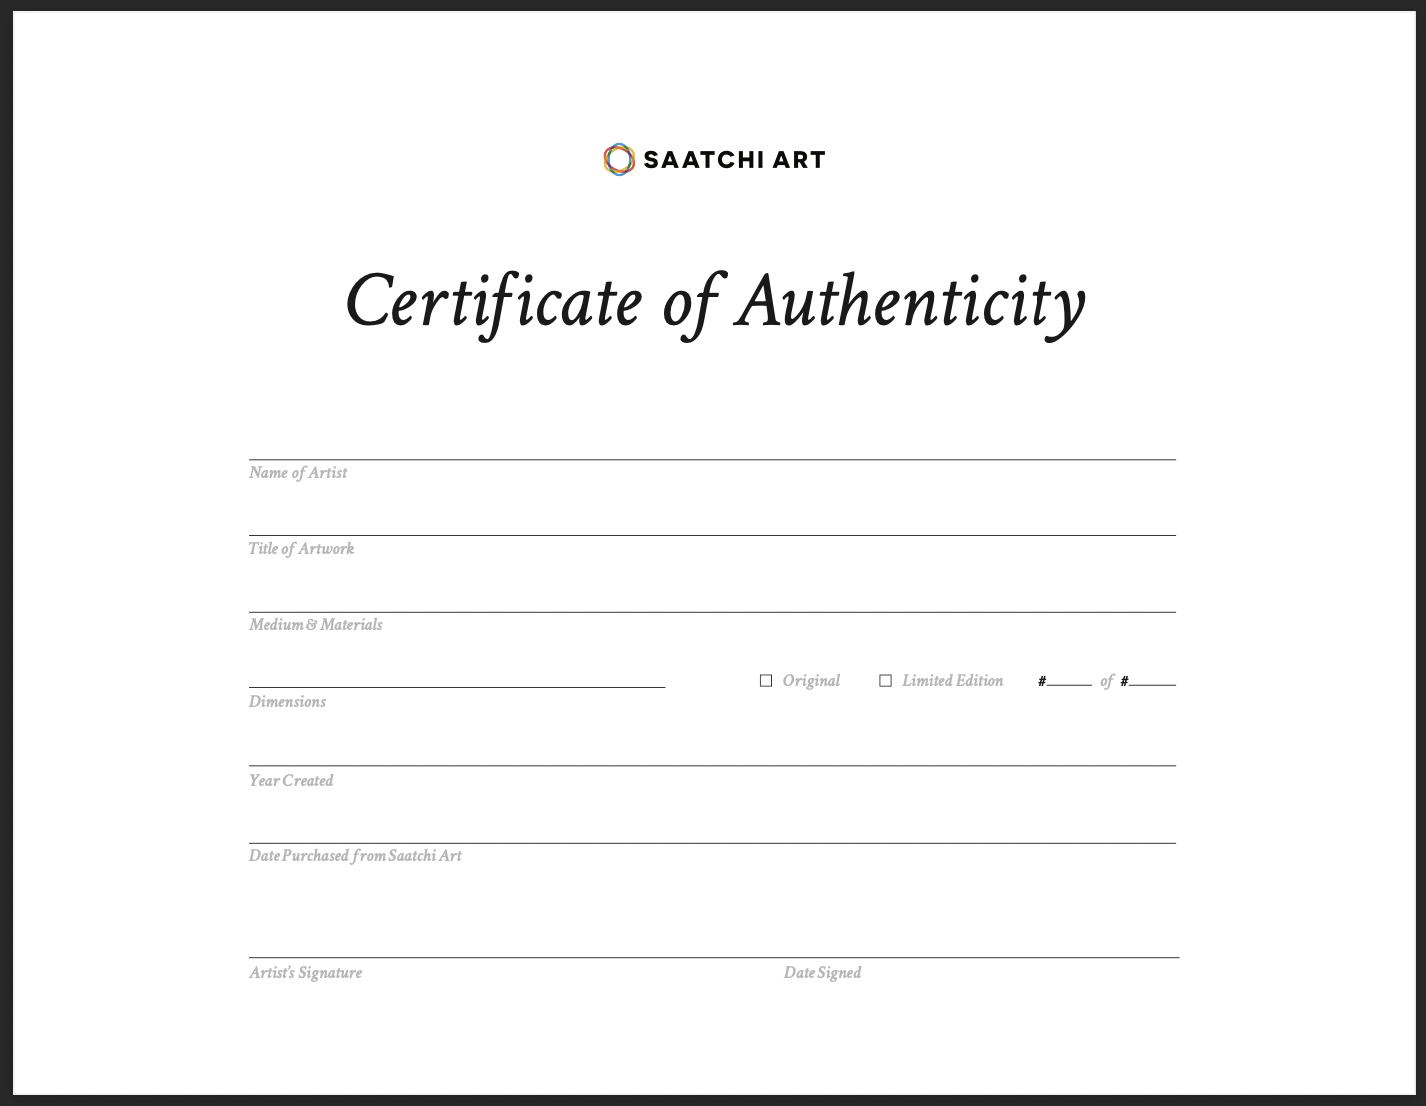 art certificate of authenticity template free, free art certificate of authenticity template, certificate of authenticity art free template, painting certificate of authenticity template, fine art photography certificate of authenticity template, modern certificate of authenticity art template, downloadable free printable certificate of authenticity template, free printable certificate of authenticity template